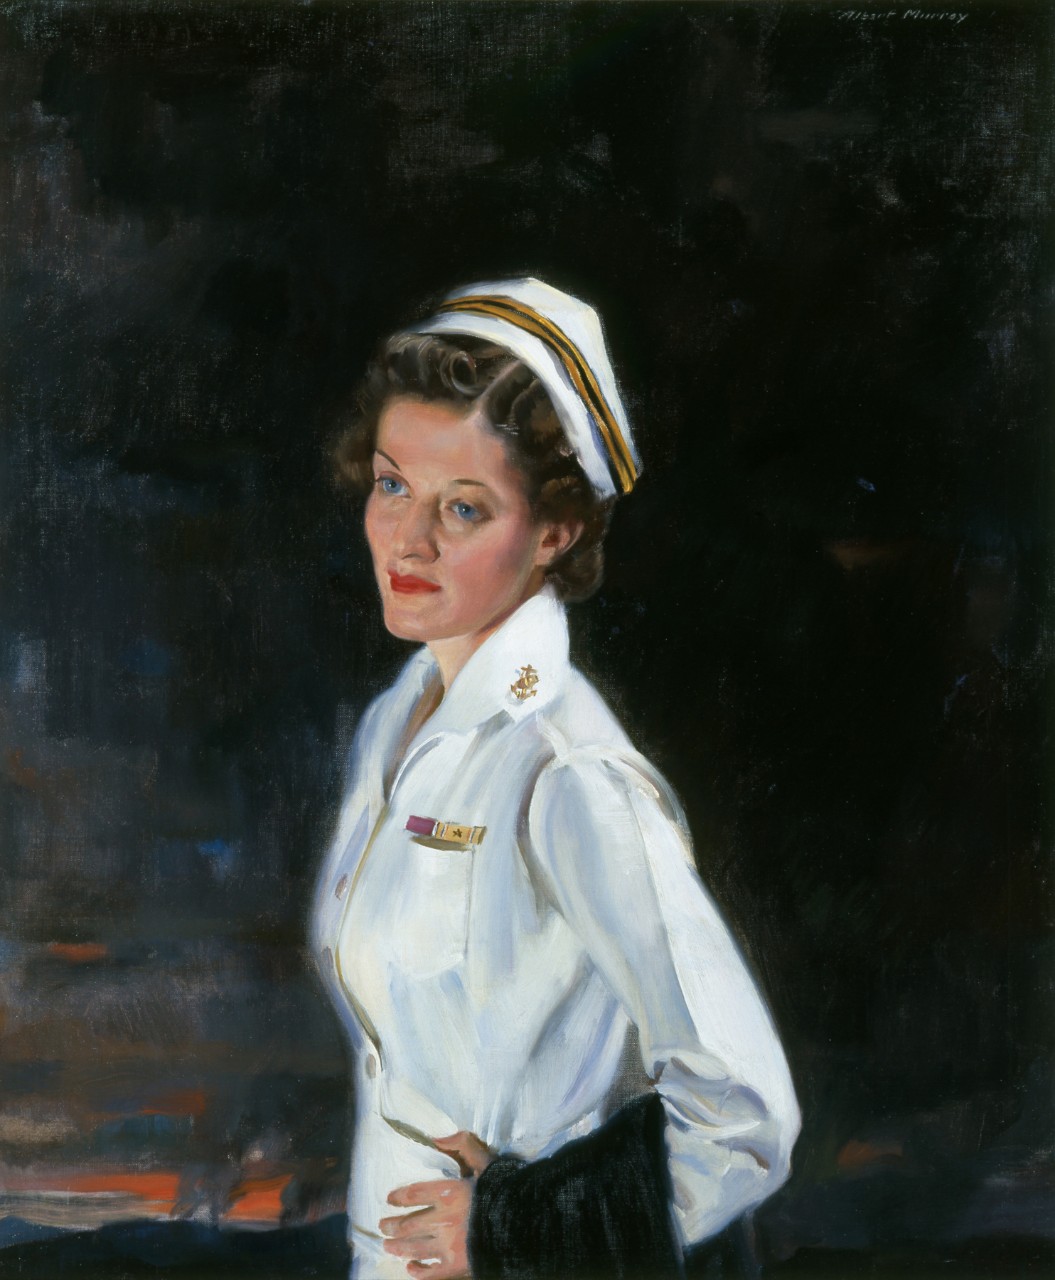 Painting of a Navy nurse with single color dark background.